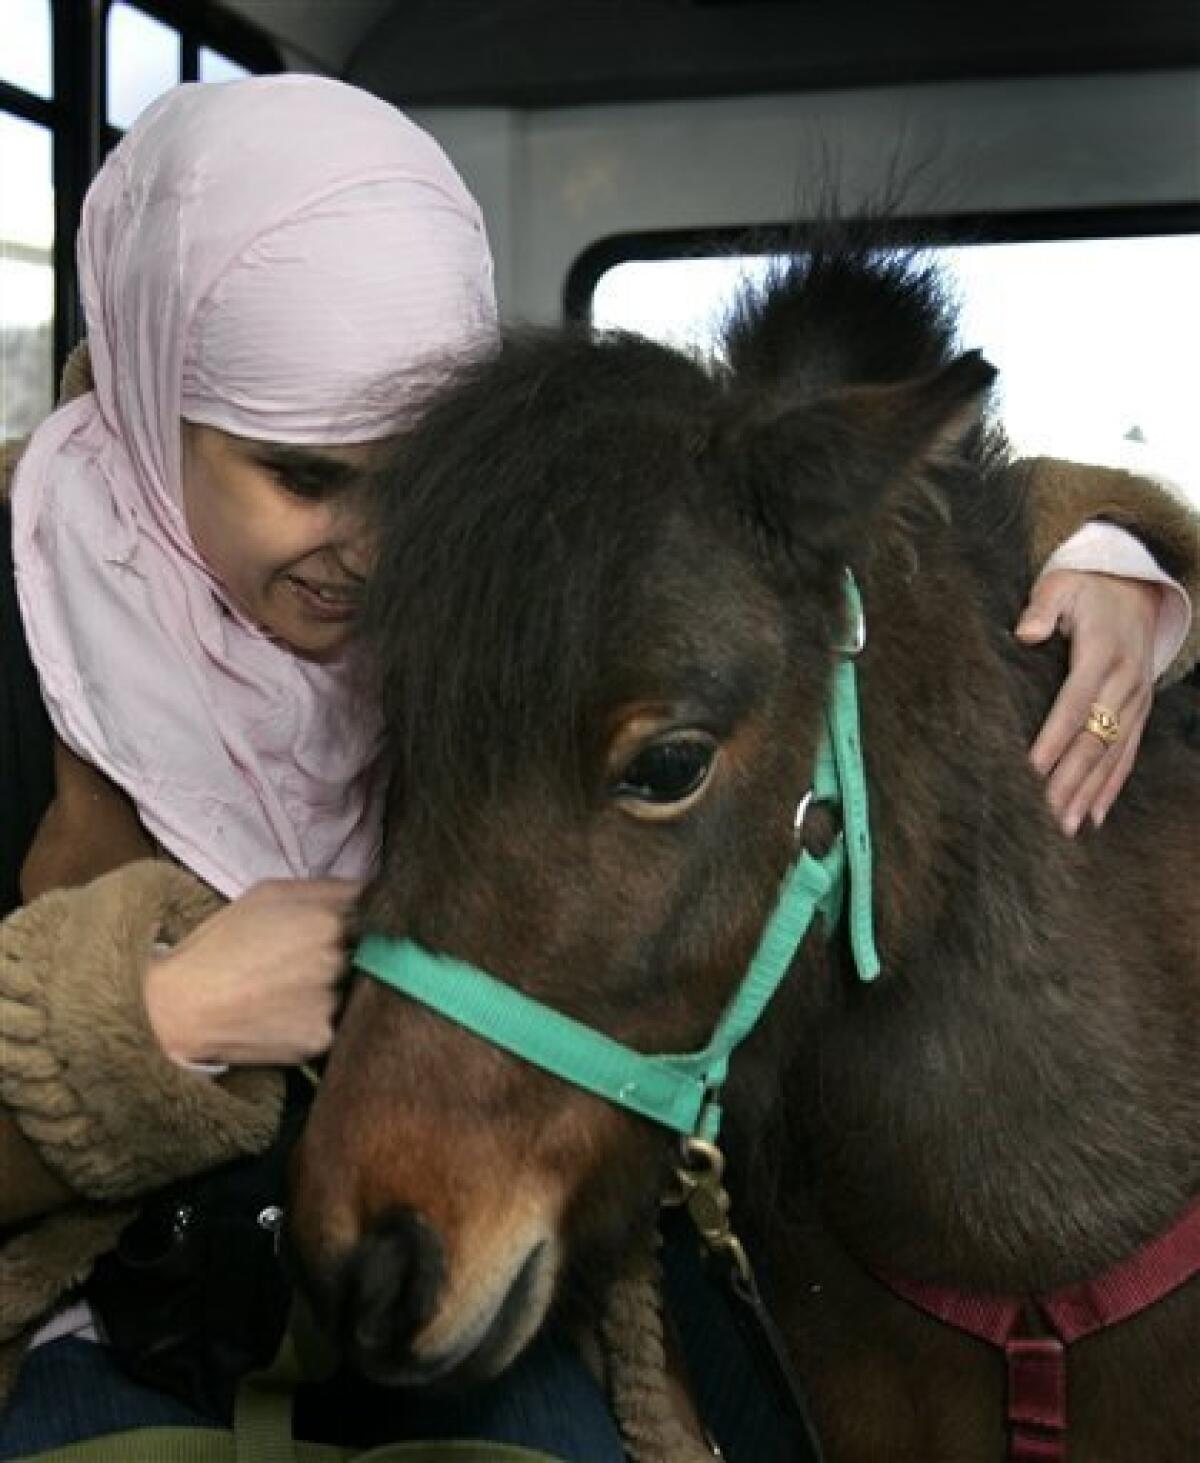 Mona Ramouni rides a SMART bus to her job with her guide horse, Cali, in Lincoln Park, Mich., Thursday, April 9, 2009. Ramouni lost her sight soon after birth, but she can't use a guide dog. Many Muslims consider dogs unclean, and Ramouni respects her parents' aversion to having one in their home. The solution, she hopes, is Cali, a miniature horse who stands 30 inches tall and is being trained to help Ramouni through her daily routine. (AP Photo/Carlos Osorio)